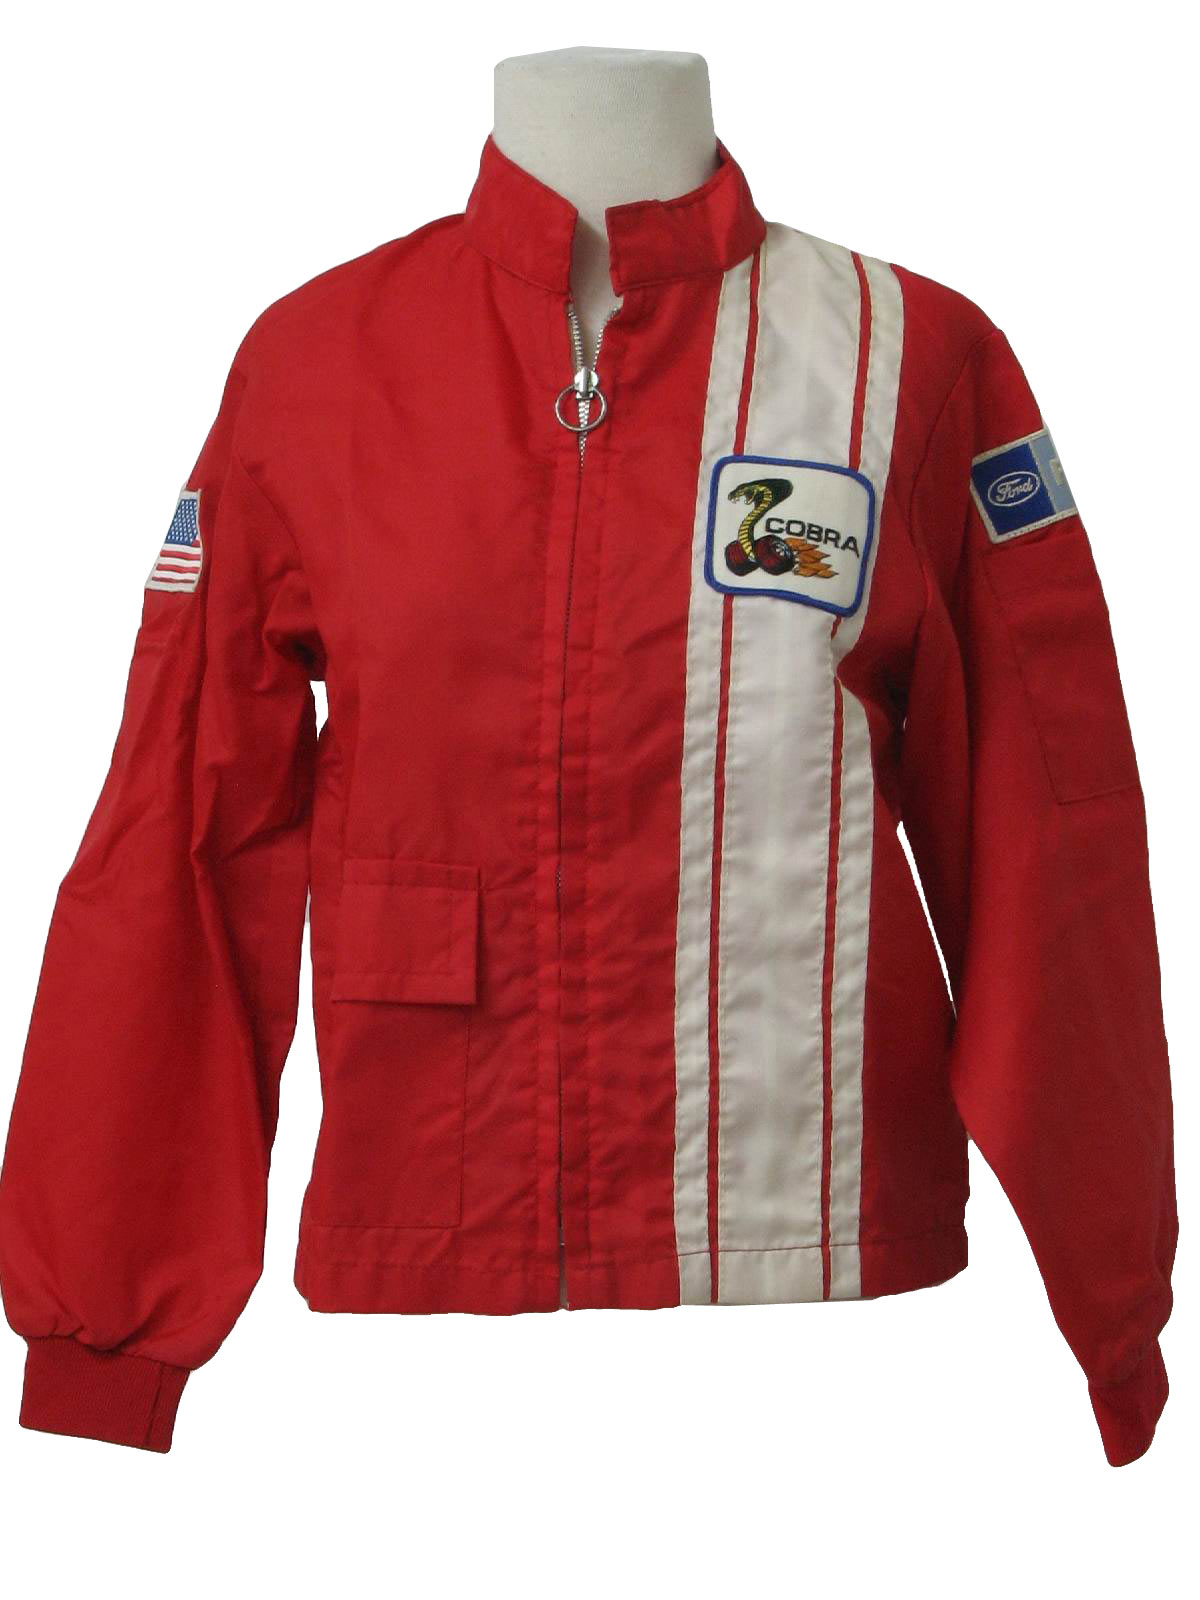 Ford racing jacket with cobra logo on it #4